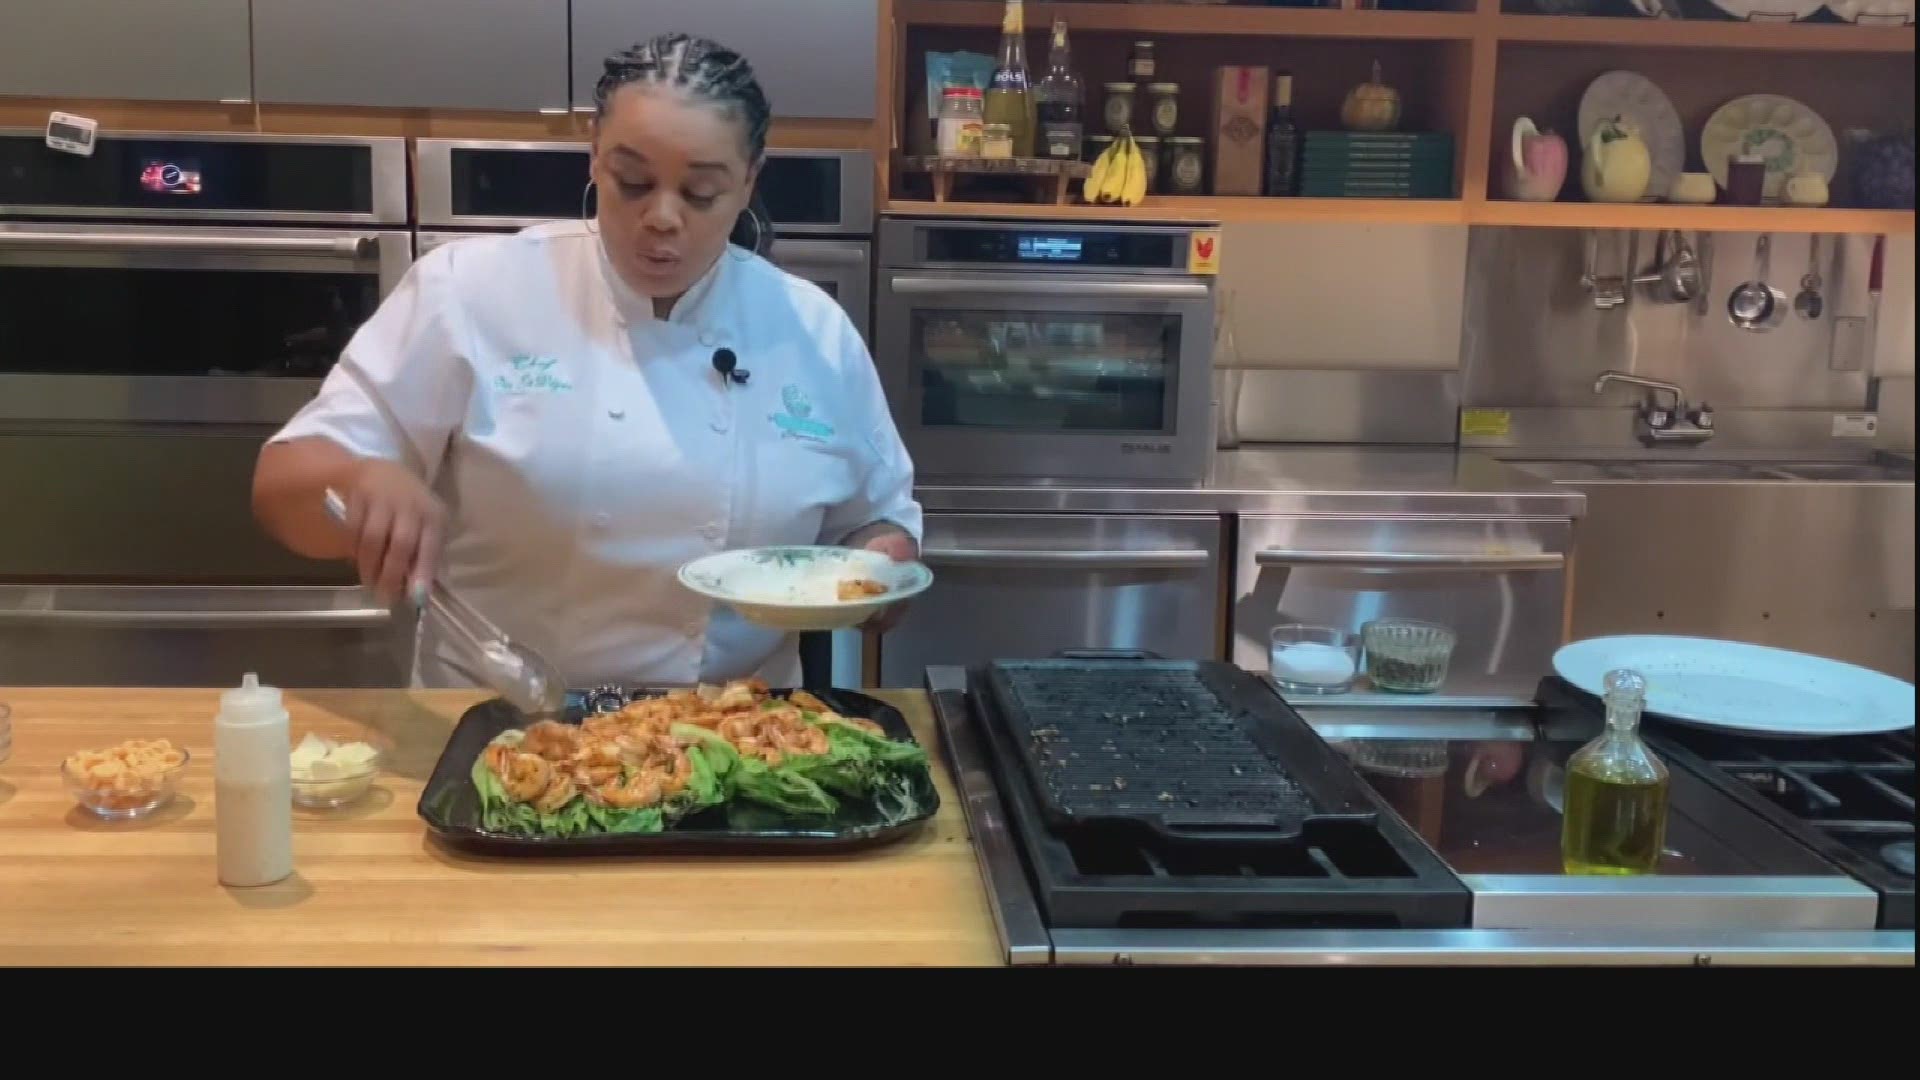 Chef Dee Lavigne with the Southern Food and Beverage Museum shares her recipe for a grill shrimp caesar salad.